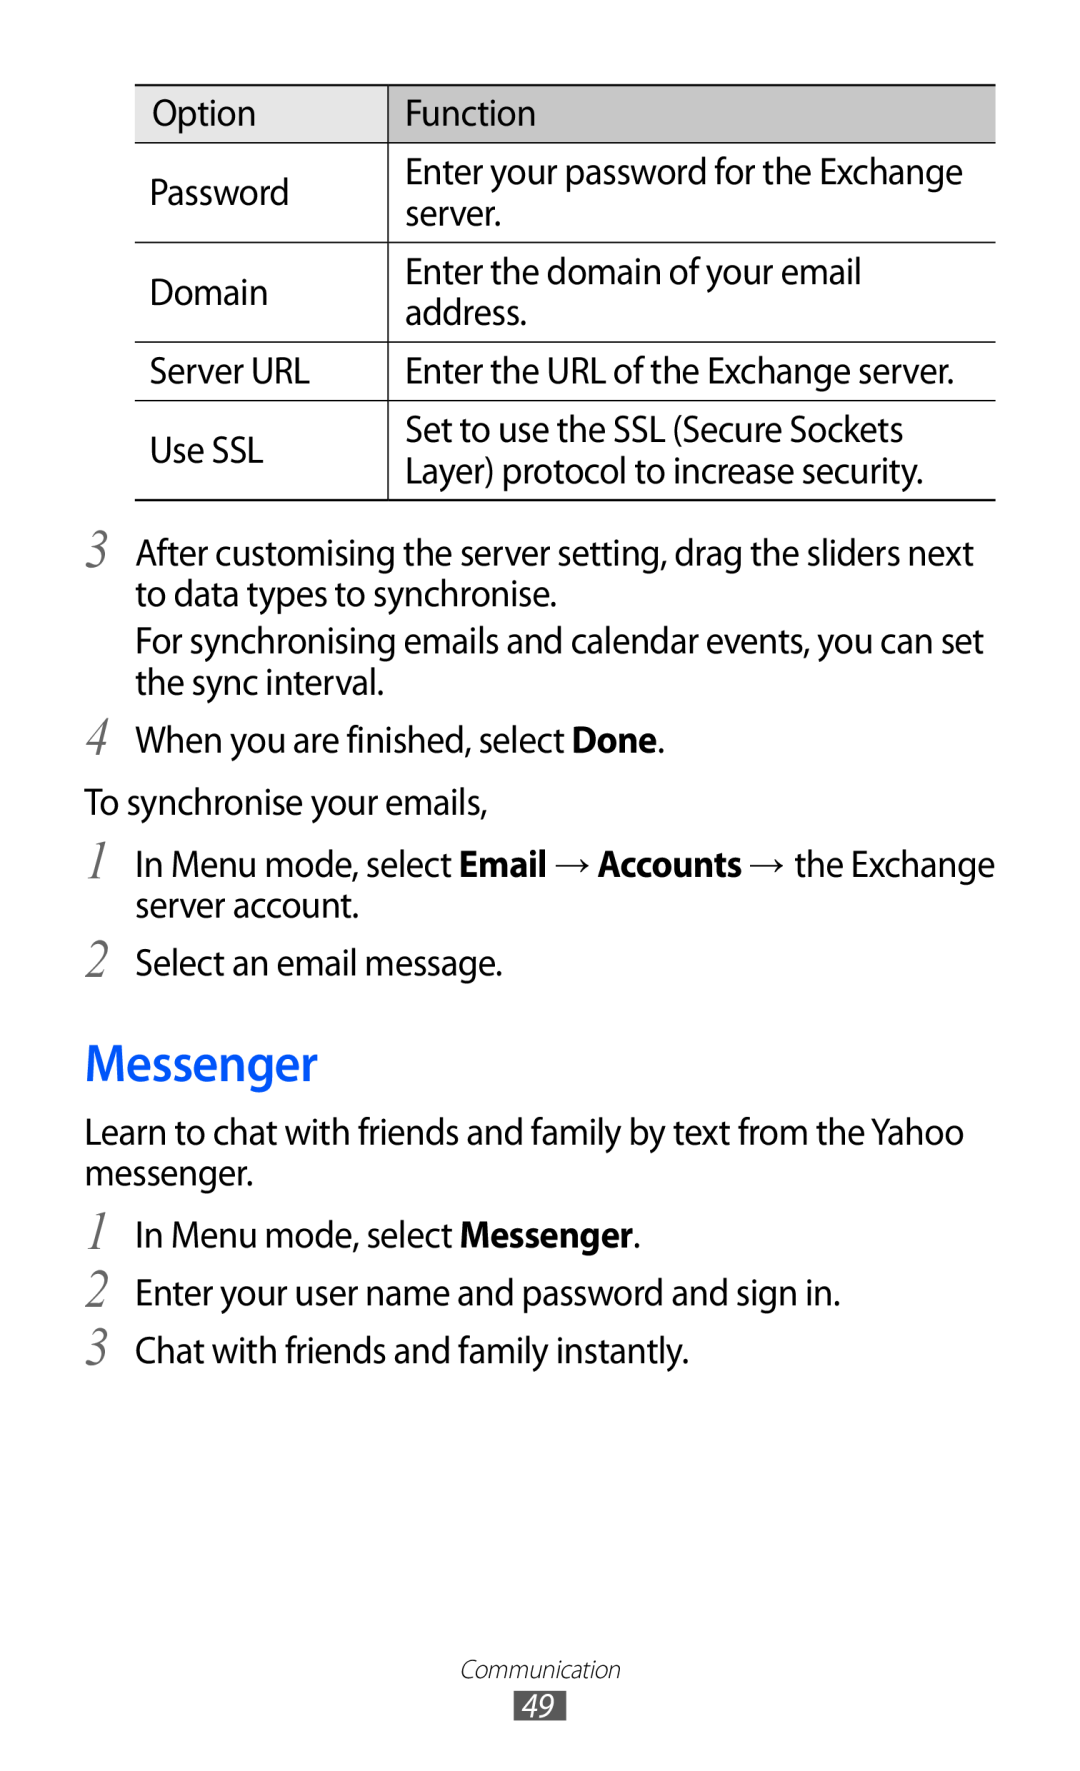 Samsung GT-S5380SSAPHE manual Messenger, Enter your password for the Exchange, Enter the URL of the Exchange server 